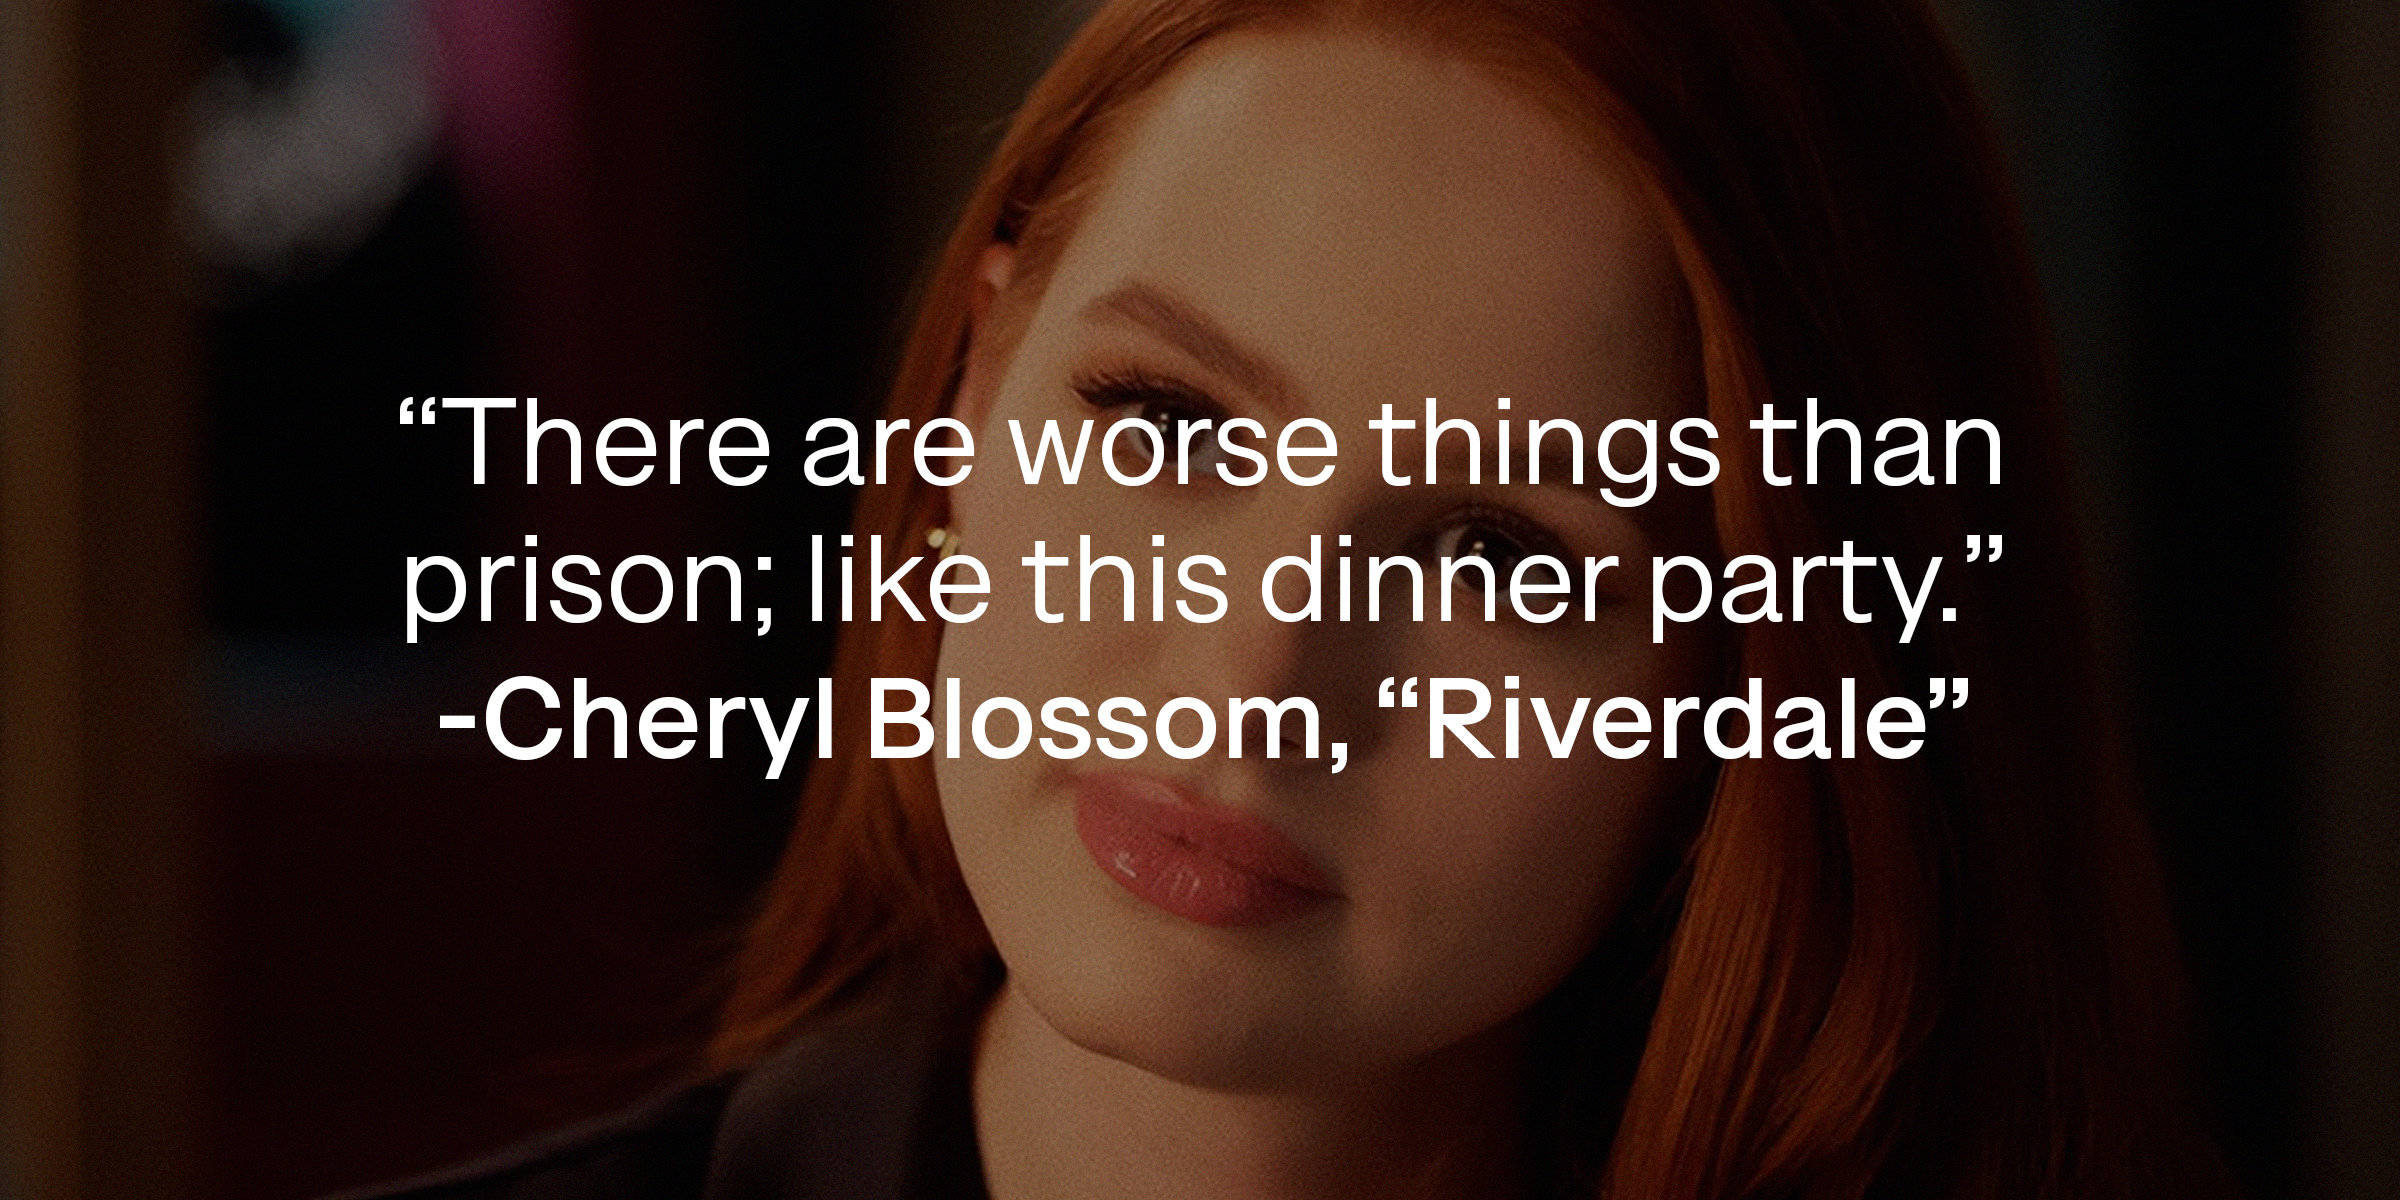 Cheryl Blossom with her quote: "There are worse things than prison; like this dinner party." | Source: Facebook.com/CWRiverdale